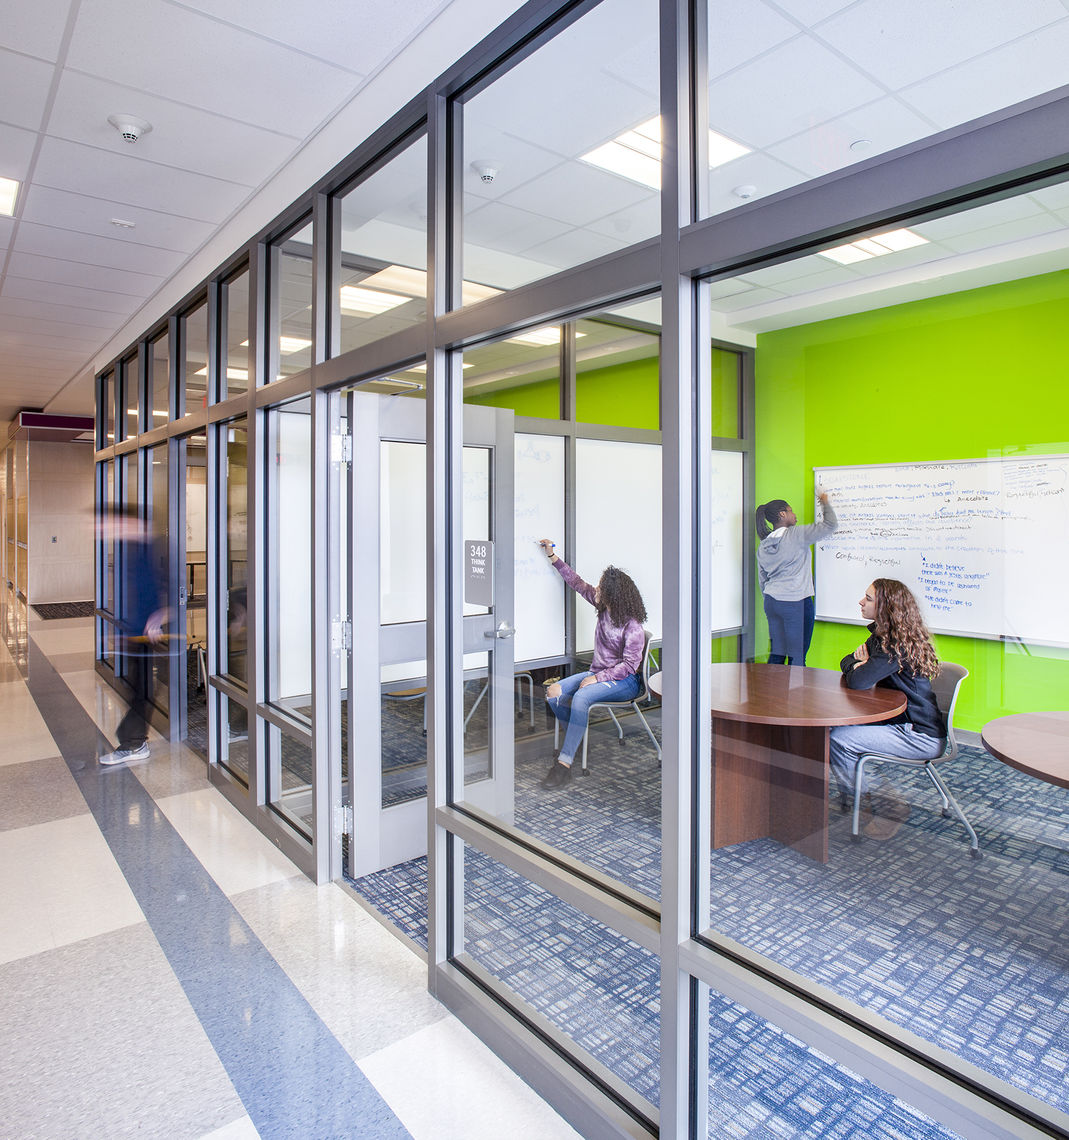 Think Tanks: Enclosed, but still visible spaces that support mixed-learning between departments, small group discussions, and group work.  Located in the academic corridors, these spaces are open to all departments and can accommodate up to 8 people.